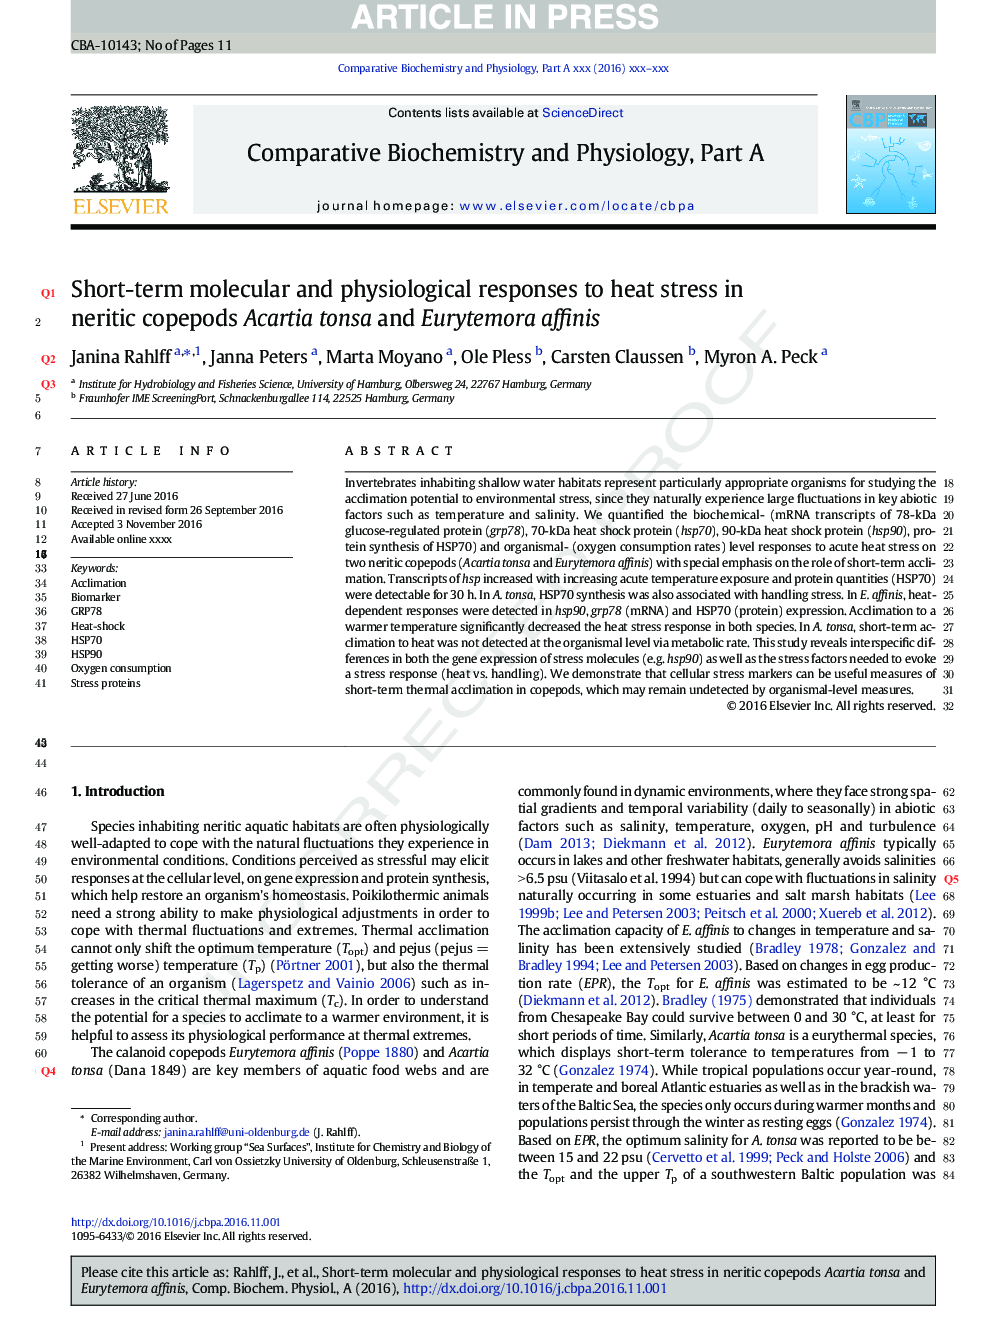 Short-term molecular and physiological responses to heat stress in neritic copepods Acartia tonsa and Eurytemora affinis